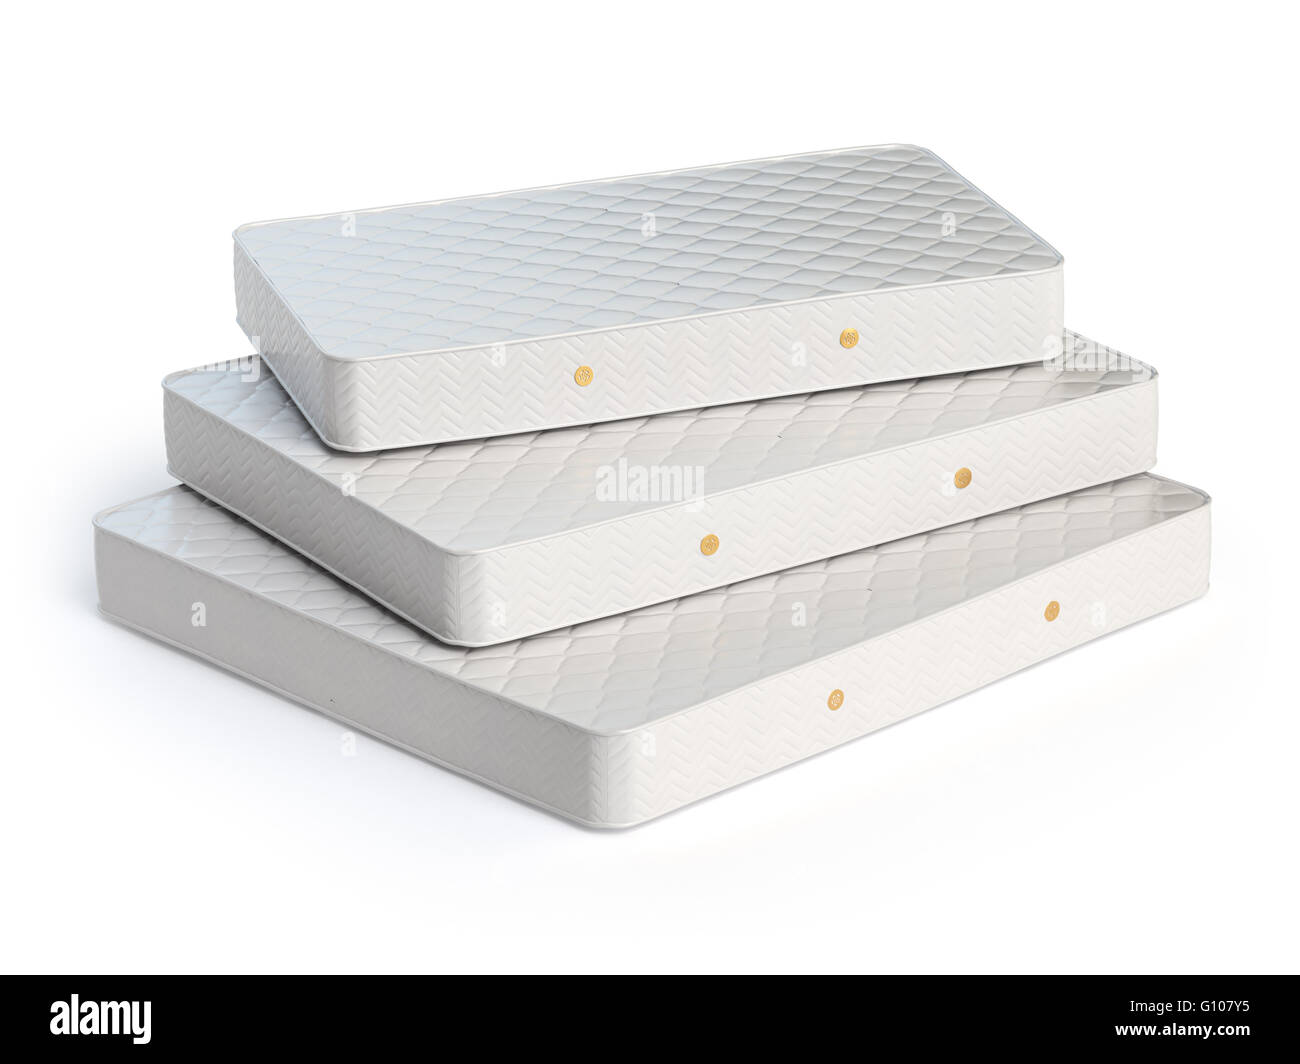 Mattress isolated on white background. Stack of orthopedic mattresses of different sizes. 3d illustration Stock Photo